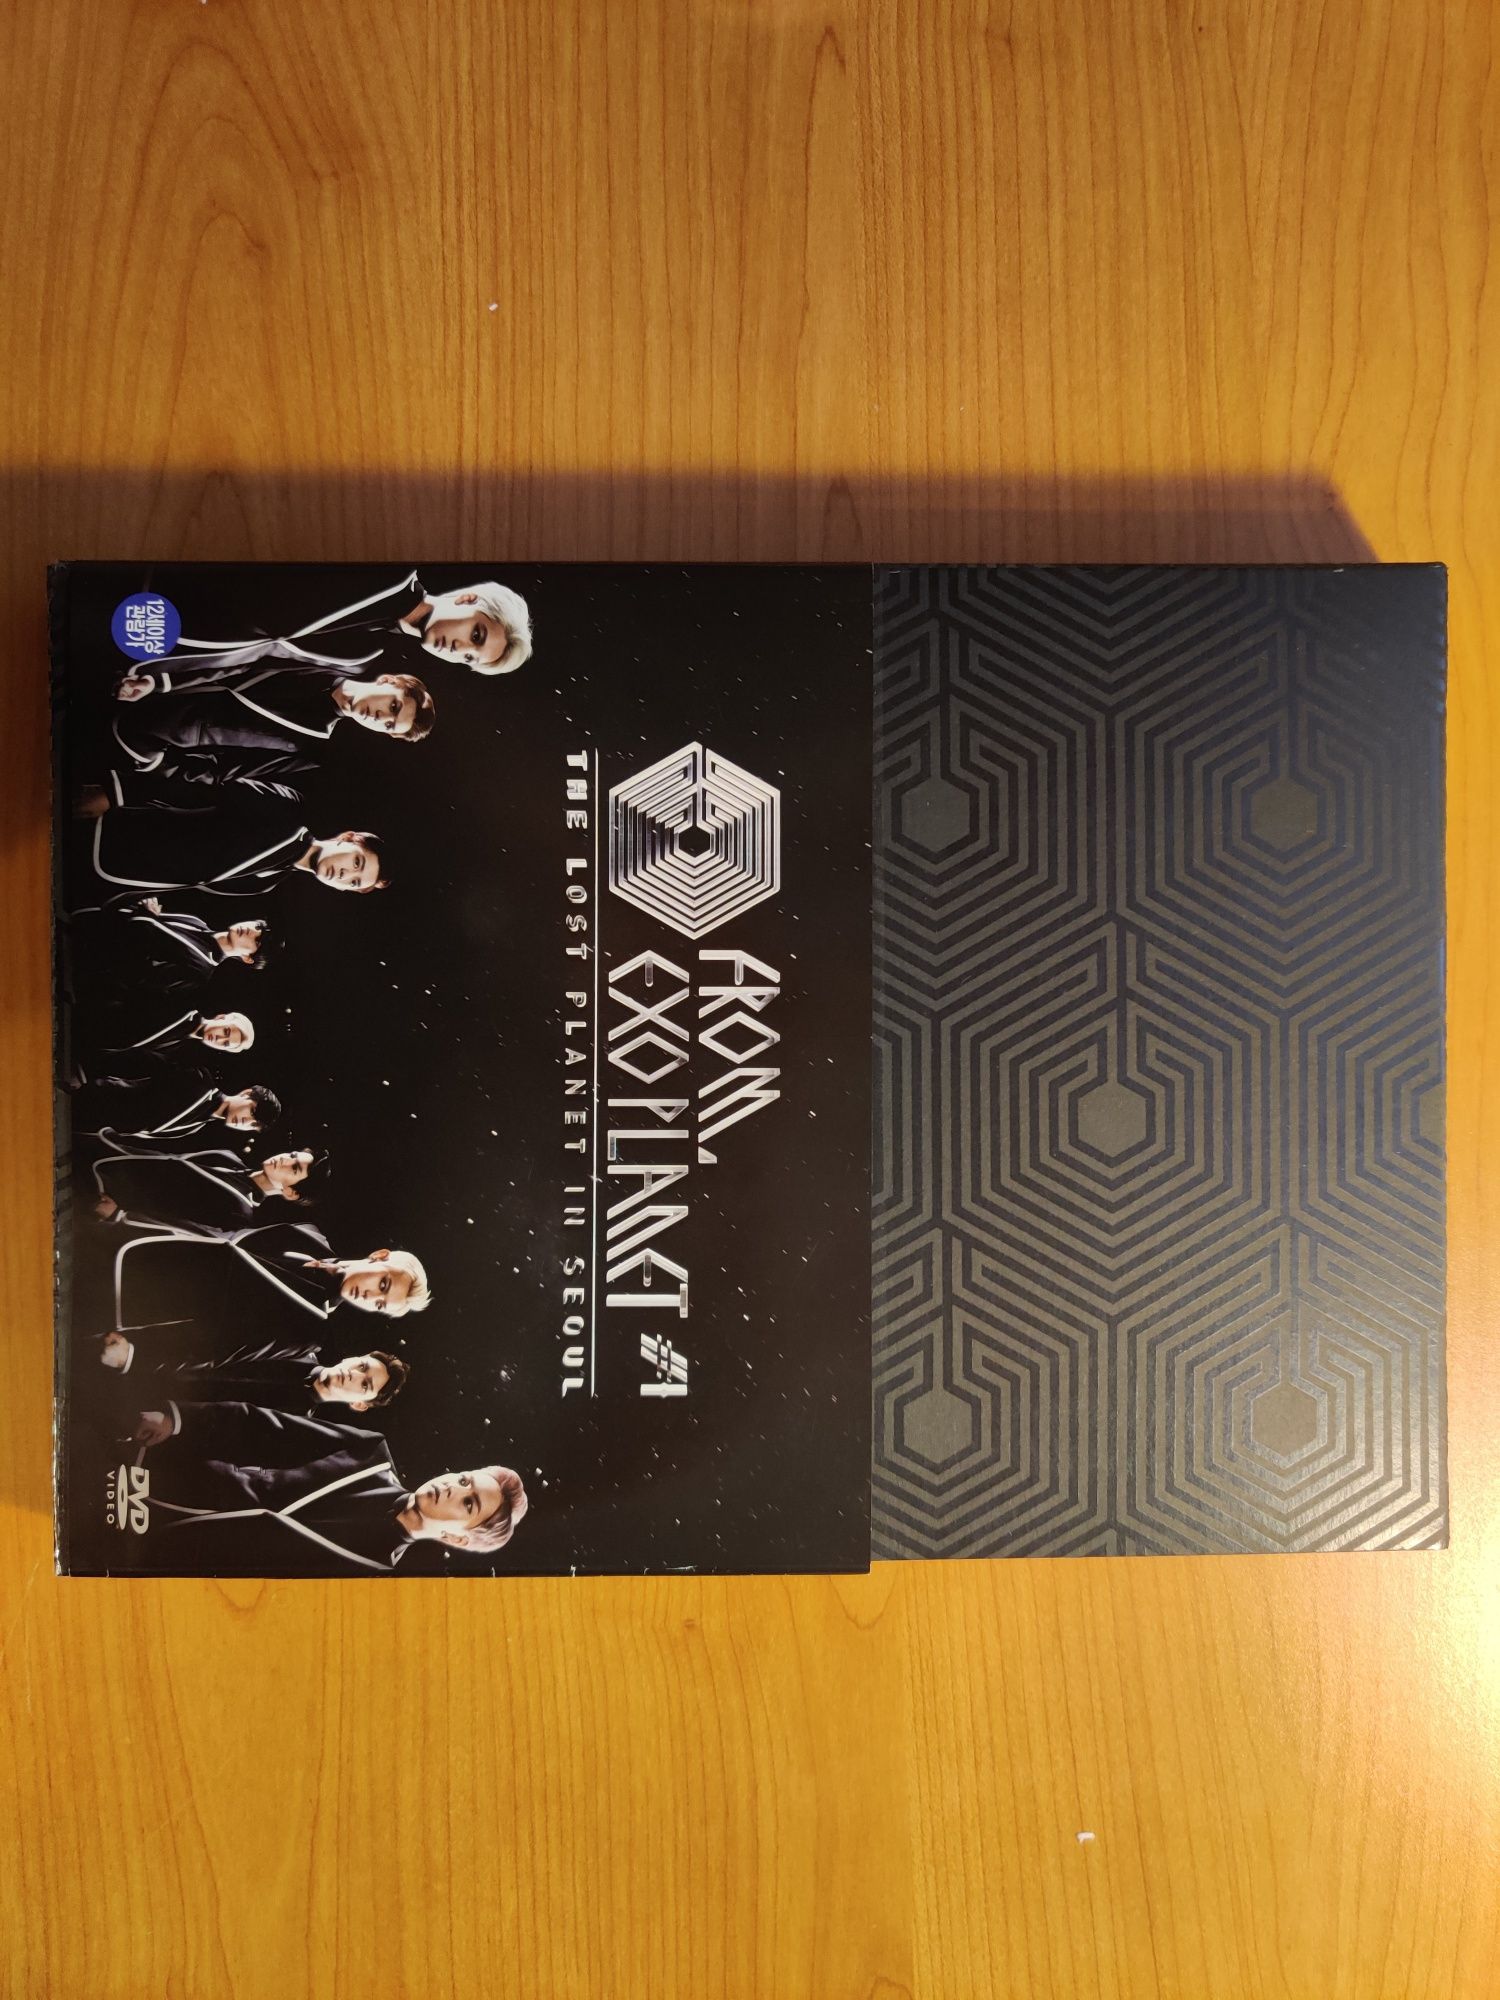 Exo From Exoplanet #1: The Lost Planet in Seoul DVD